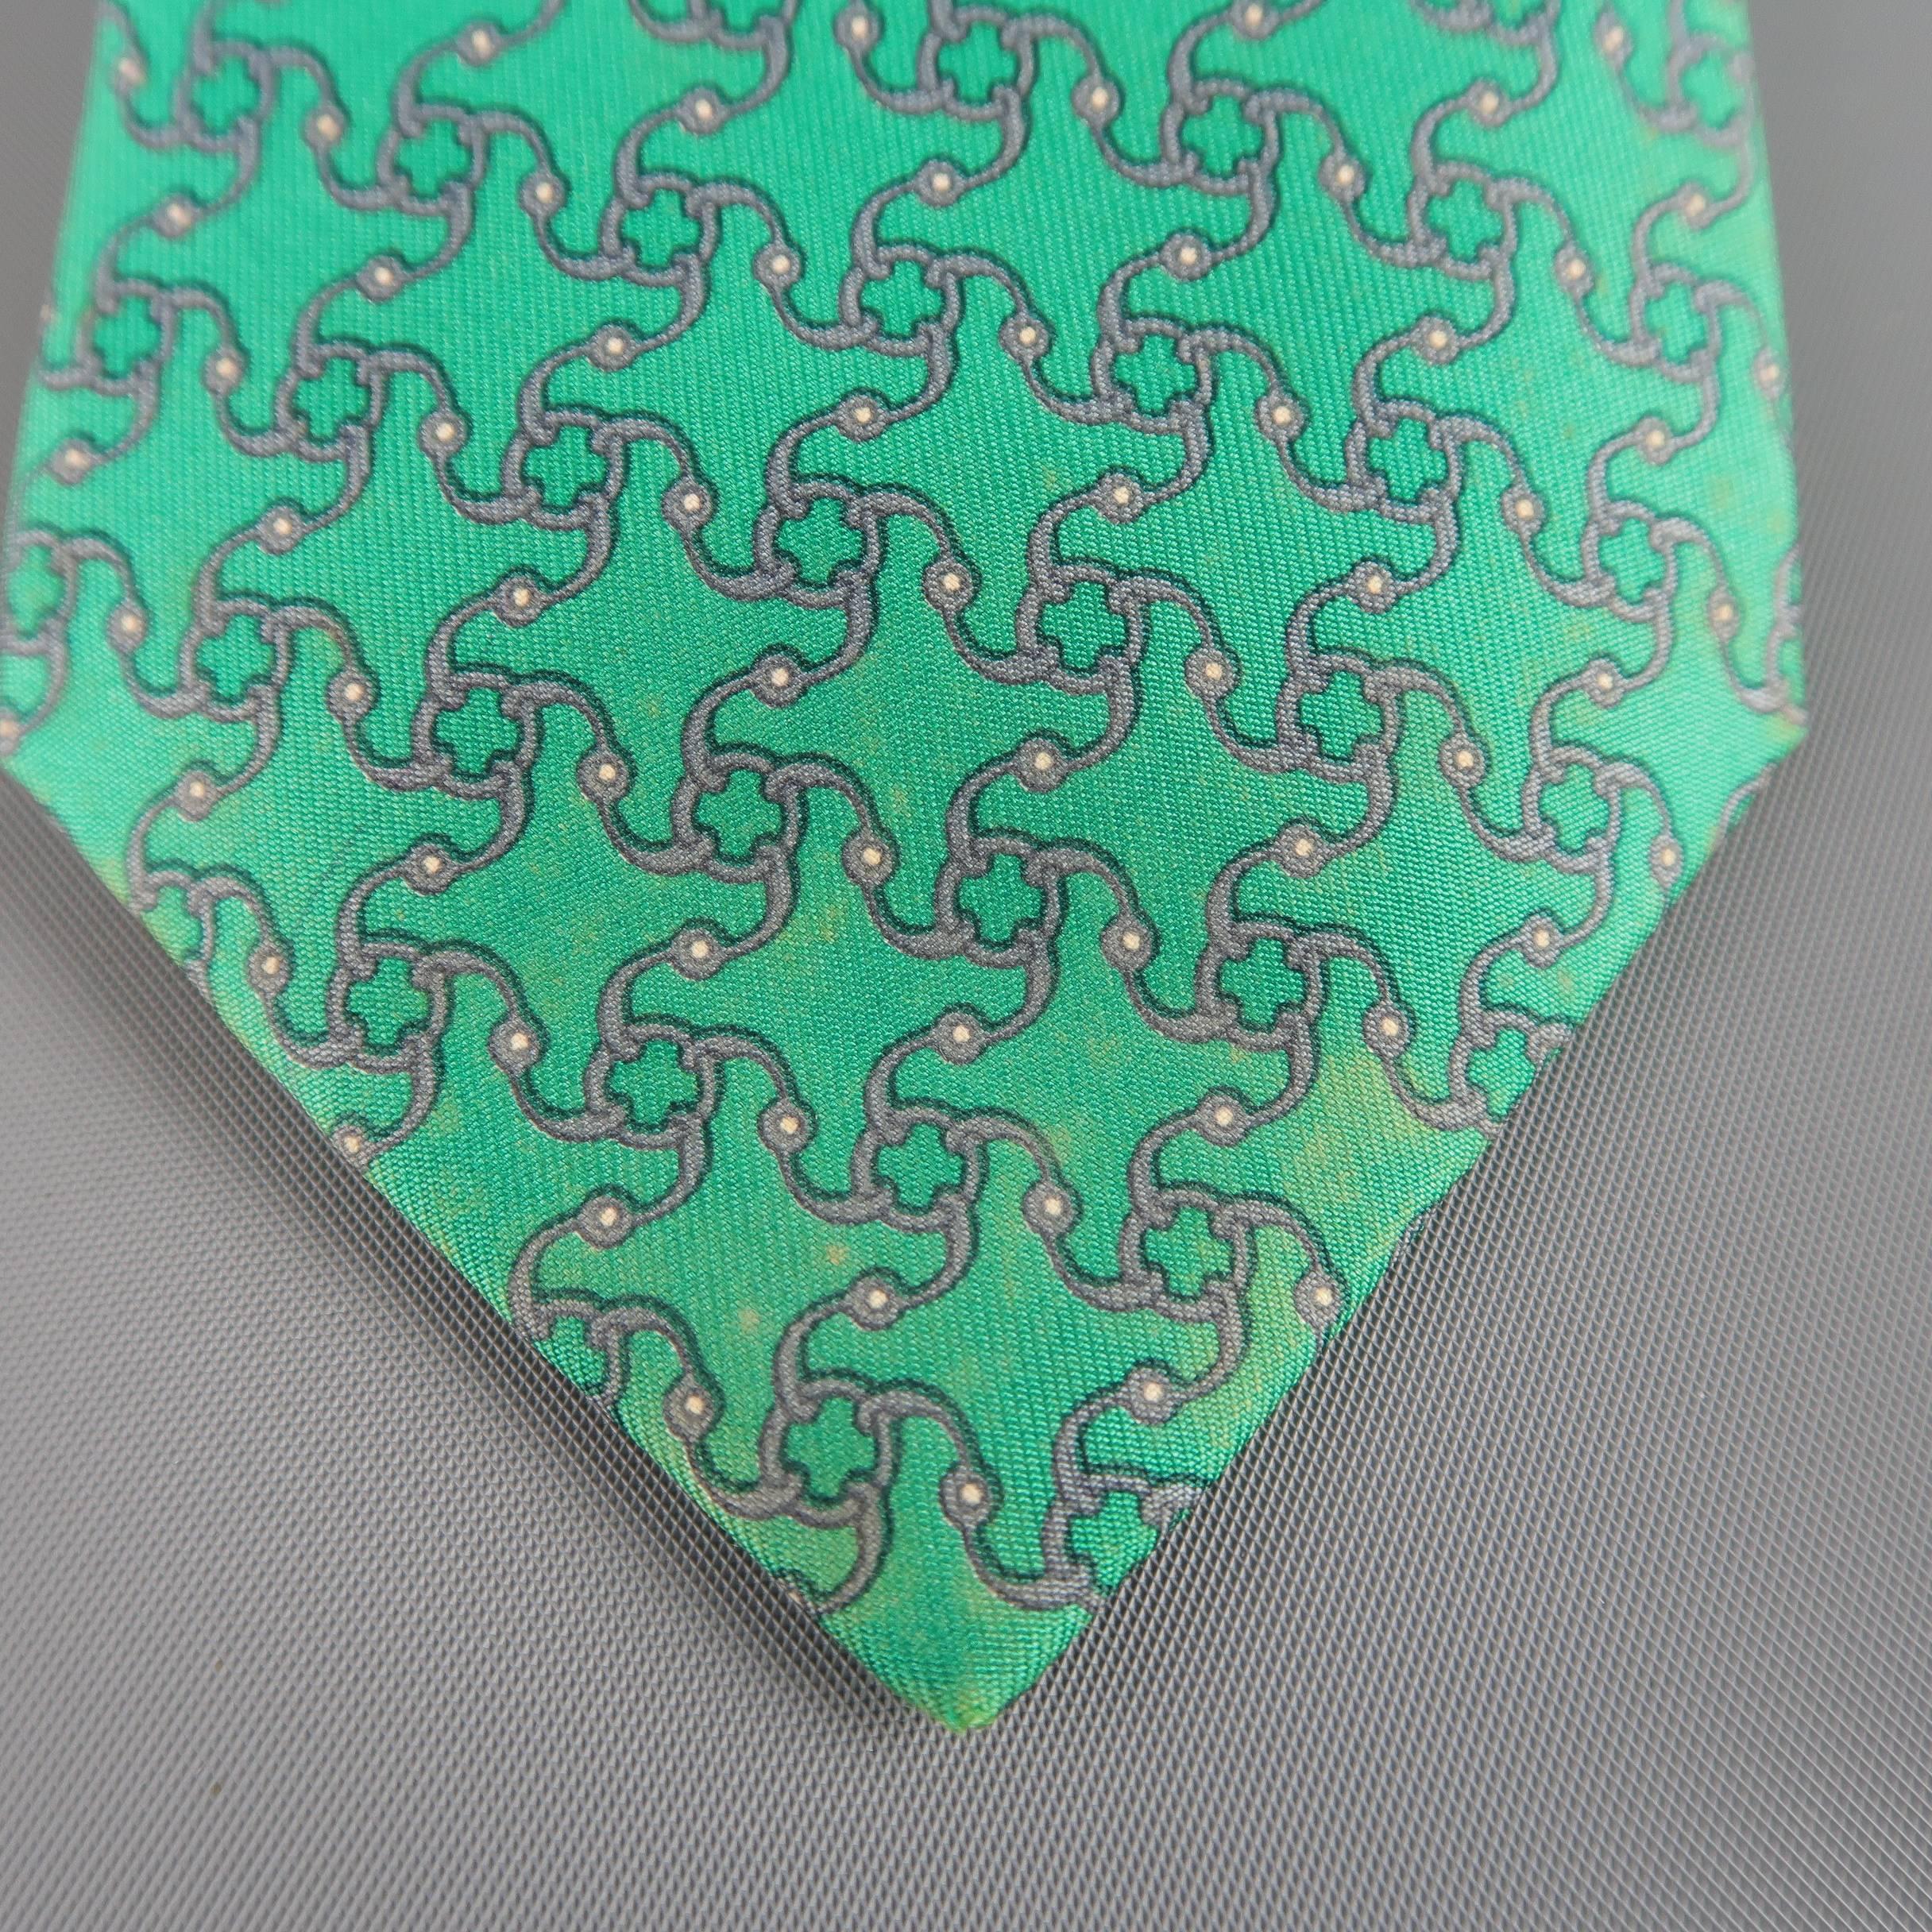 Vintage HERMES necktie comes in emerald green silk twill with all over gray interlock pattern. Discolorations throughout. As-is. Made in France.
 
Fair Pre-Owned Condition.
 
Width: 3.25 in.
